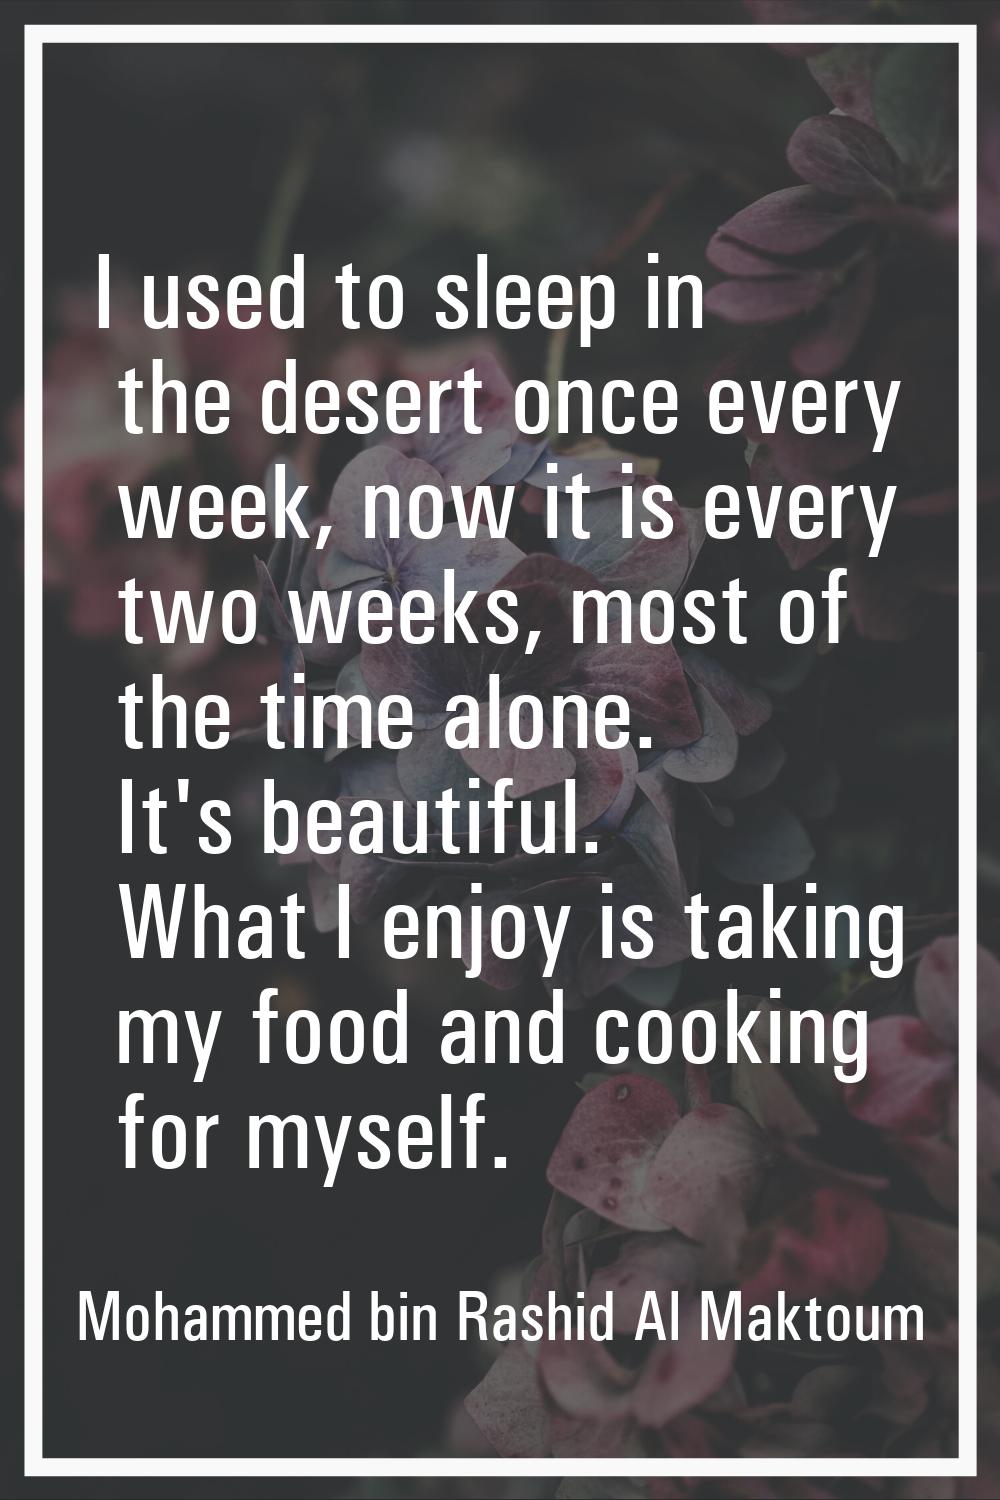 I used to sleep in the desert once every week, now it is every two weeks, most of the time alone. I